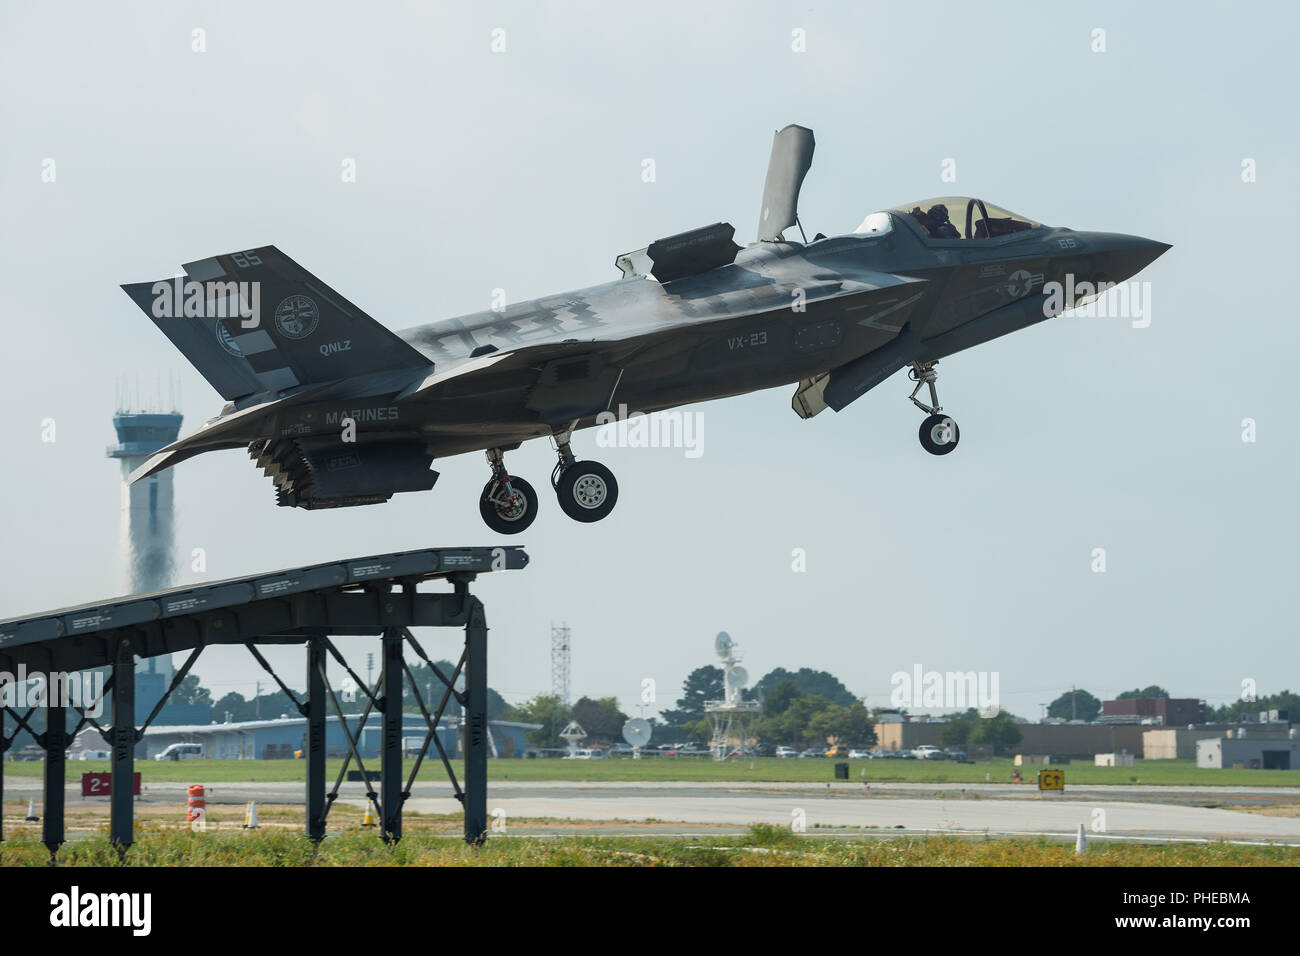 U.S. Marine Corps Maj. Michael Lippert and Royal Air Force Sq. Ldr. Andy Edgell, both F-35 Pax River ITF test pilots, conduct ski jumps and field carrier landing practices with F-35Bs on Aug. 27, 2018, at NAS Patuxent River as part of the workups for the First of Class Flight Trials aboard the HMS Queen Elizabeth.  Around 200 supporting staff from the ITF, including pilots, engineers, maintainers and data analysts, will take two F-35Bs test aircraft aboard HMS Queen Elizabeth this fall to evaluate the fifth-generation aircraft performance and integration with Royal Navy’s newest aircraft carri Stock Photo